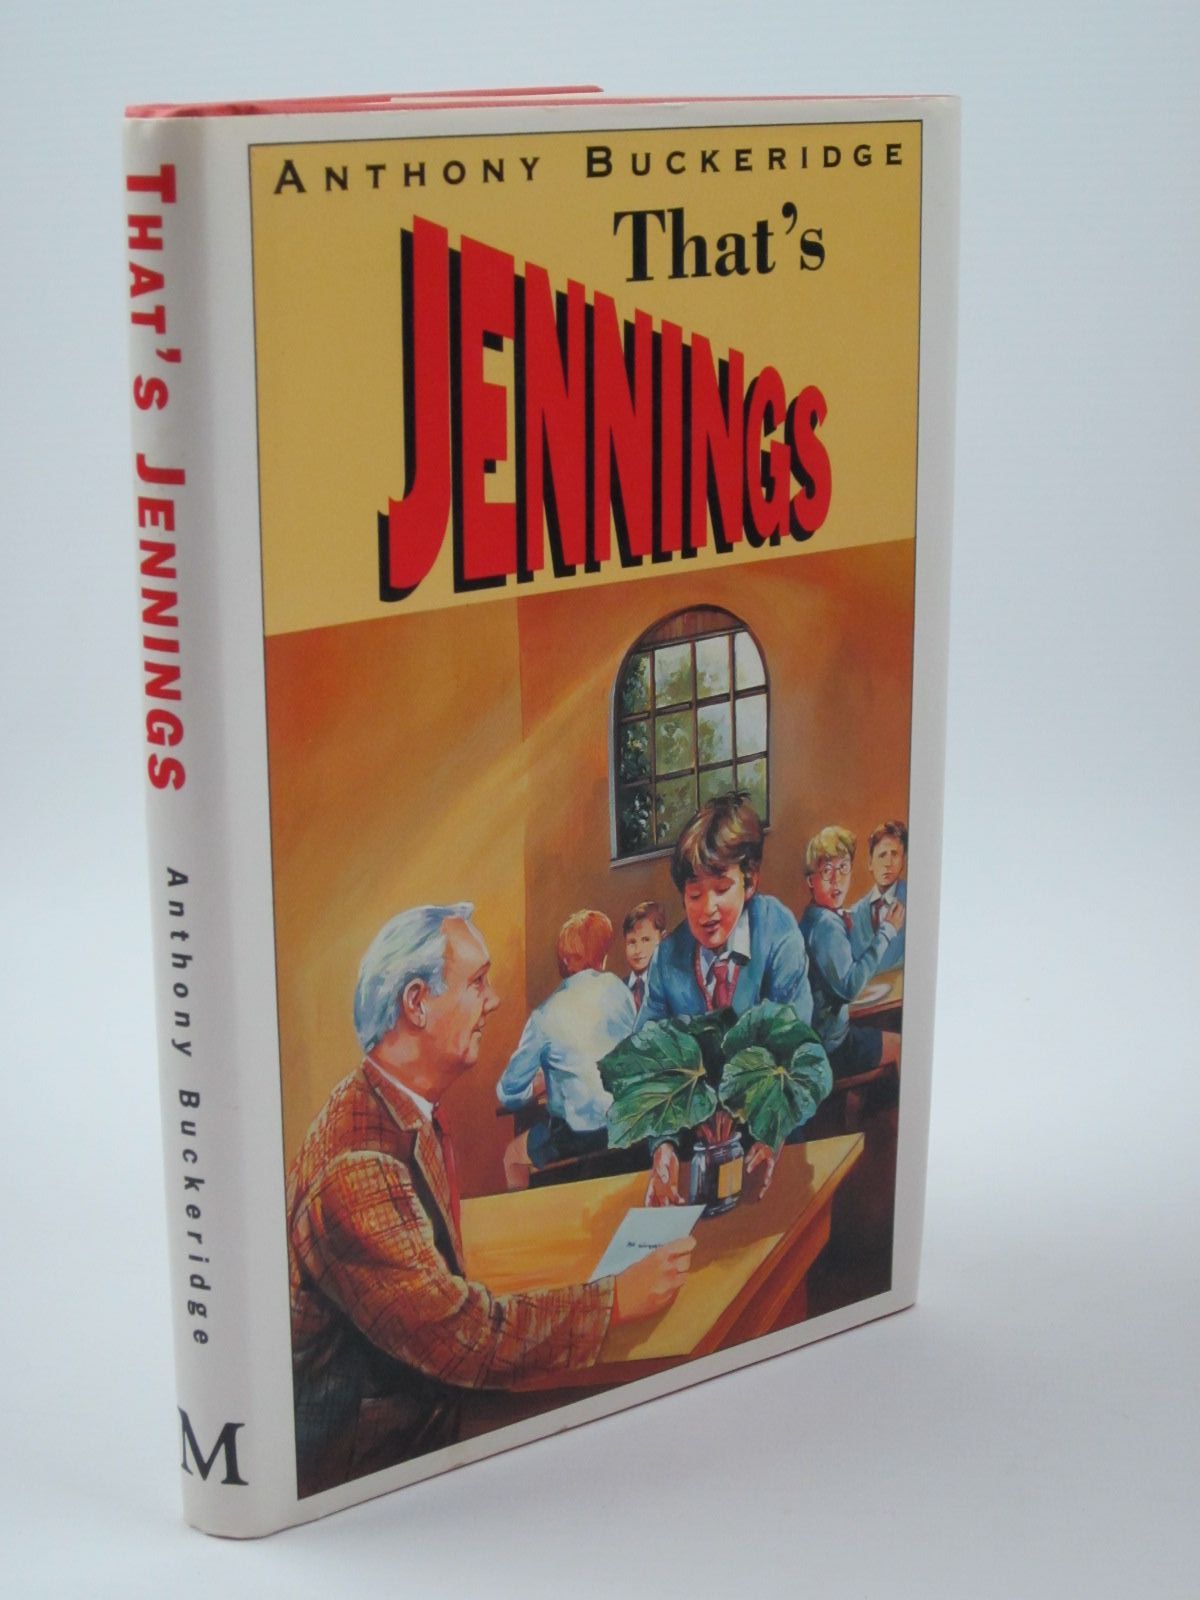 Cover of THAT'S JENNINGS by Anthony Buckeridge